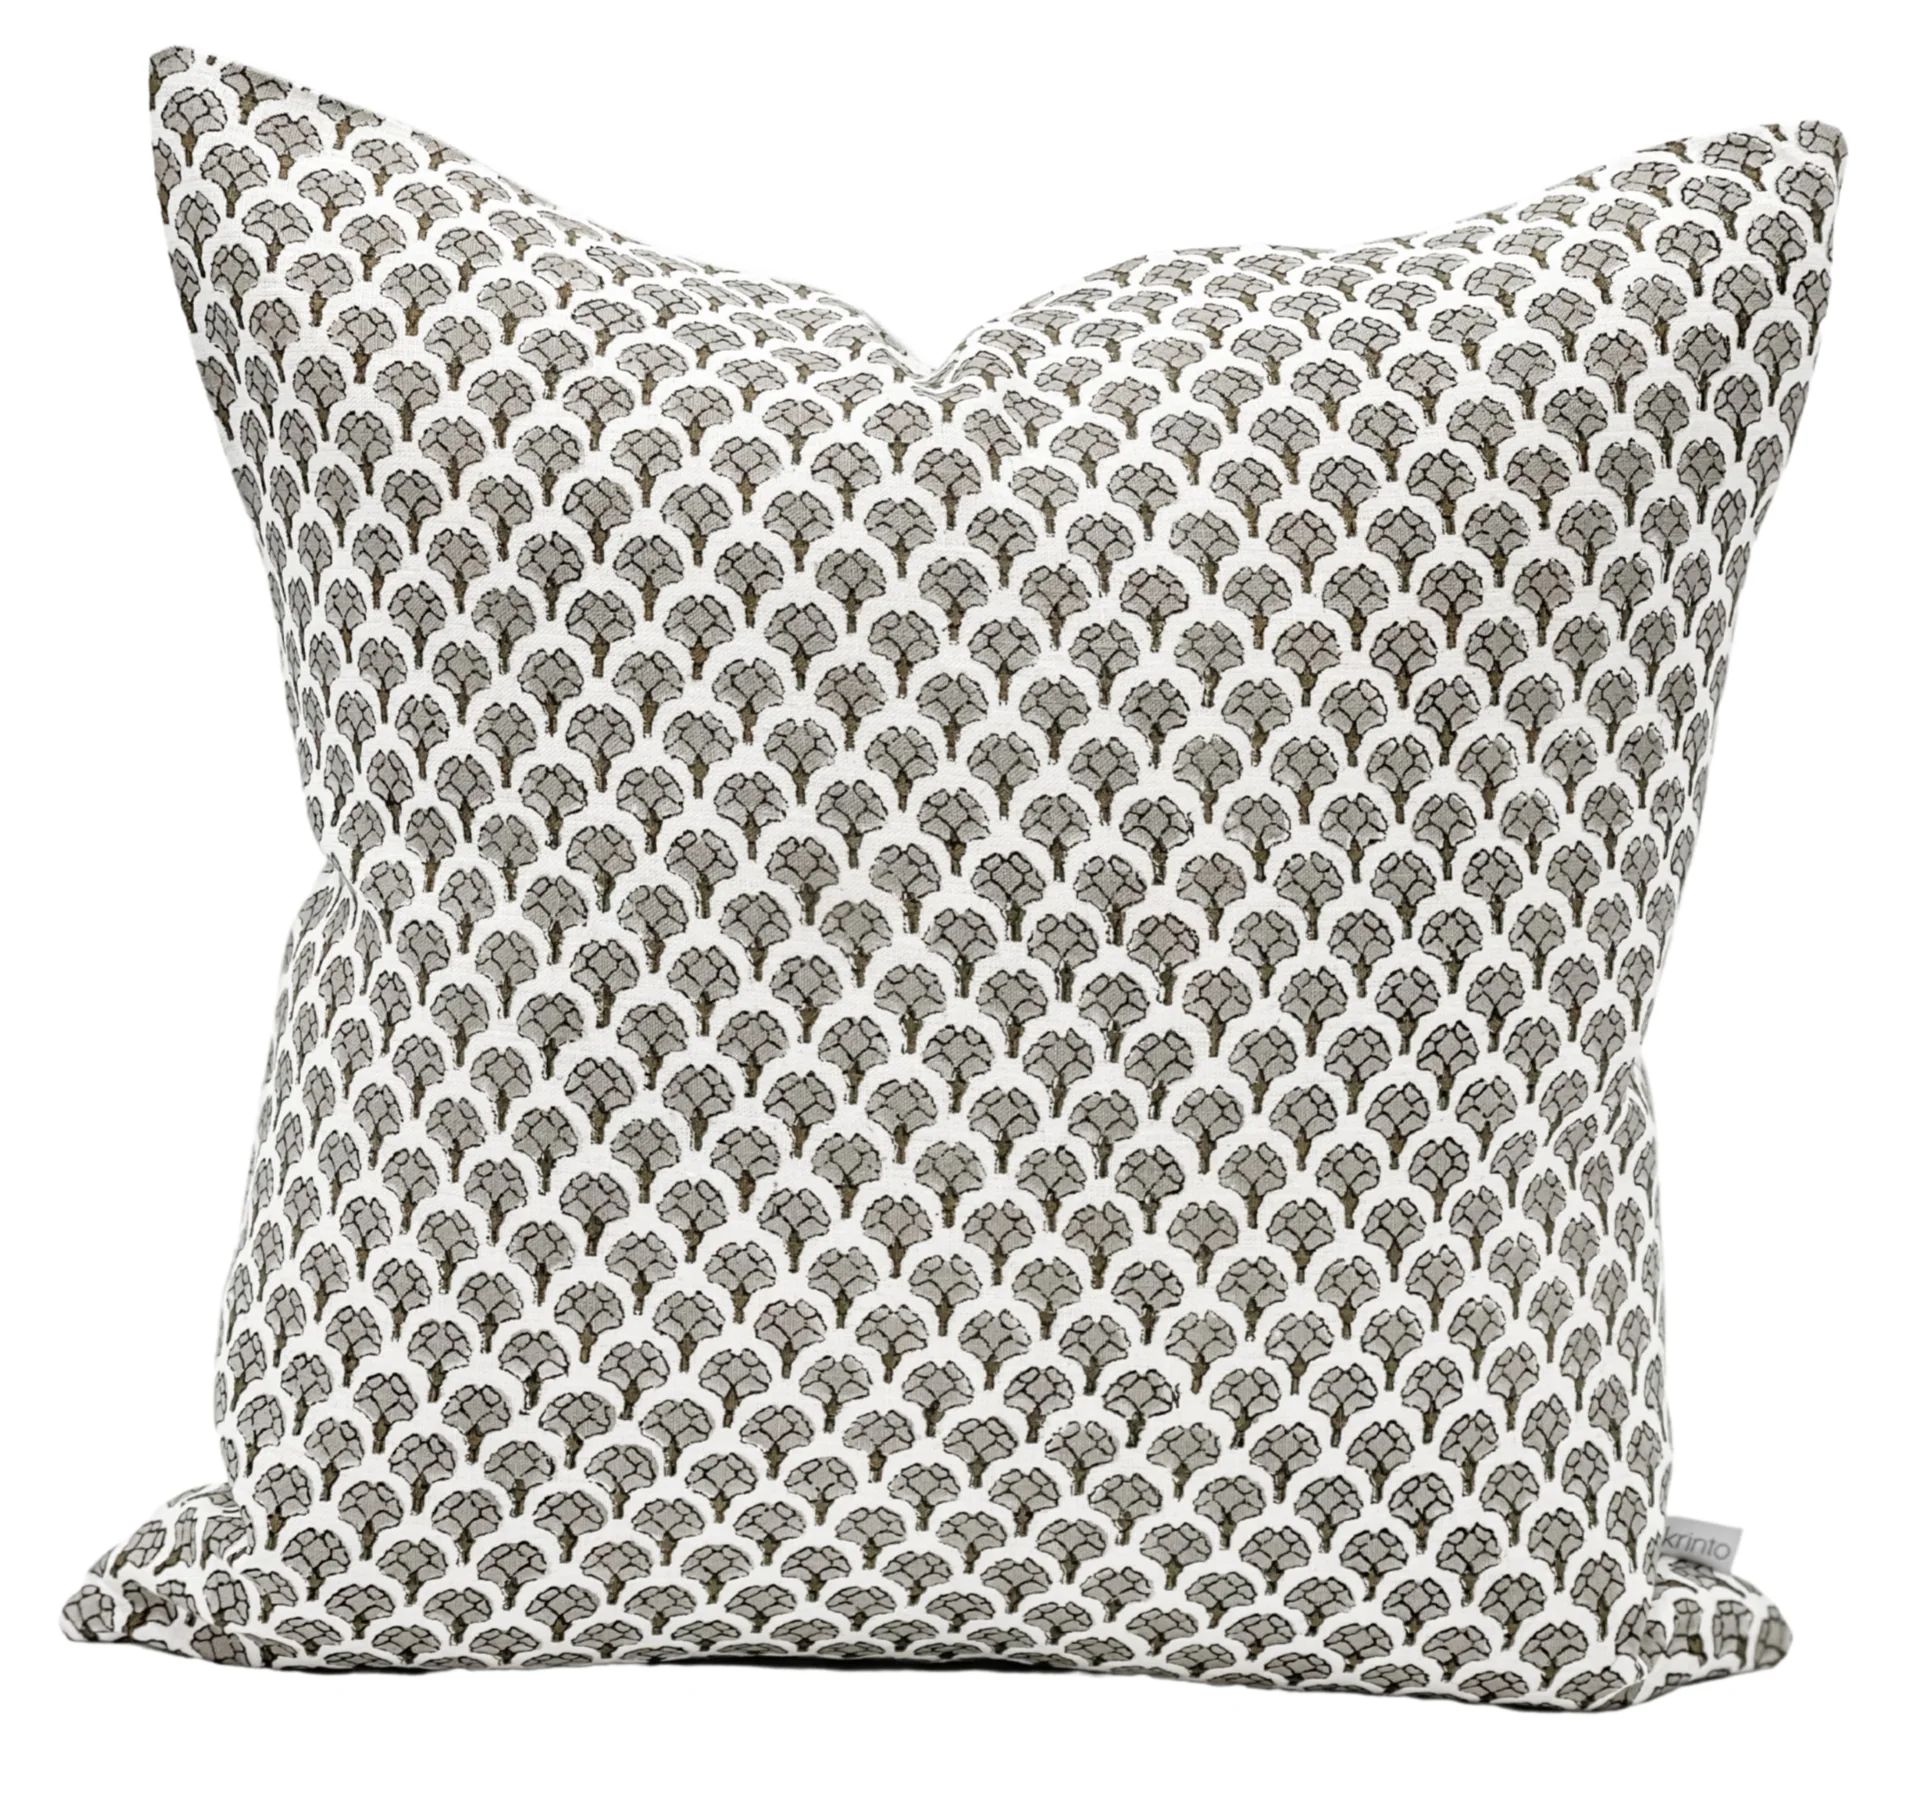 FLORAL GREY AND OLIVE GREEN ON LINEN PILLOW COVER | Krinto